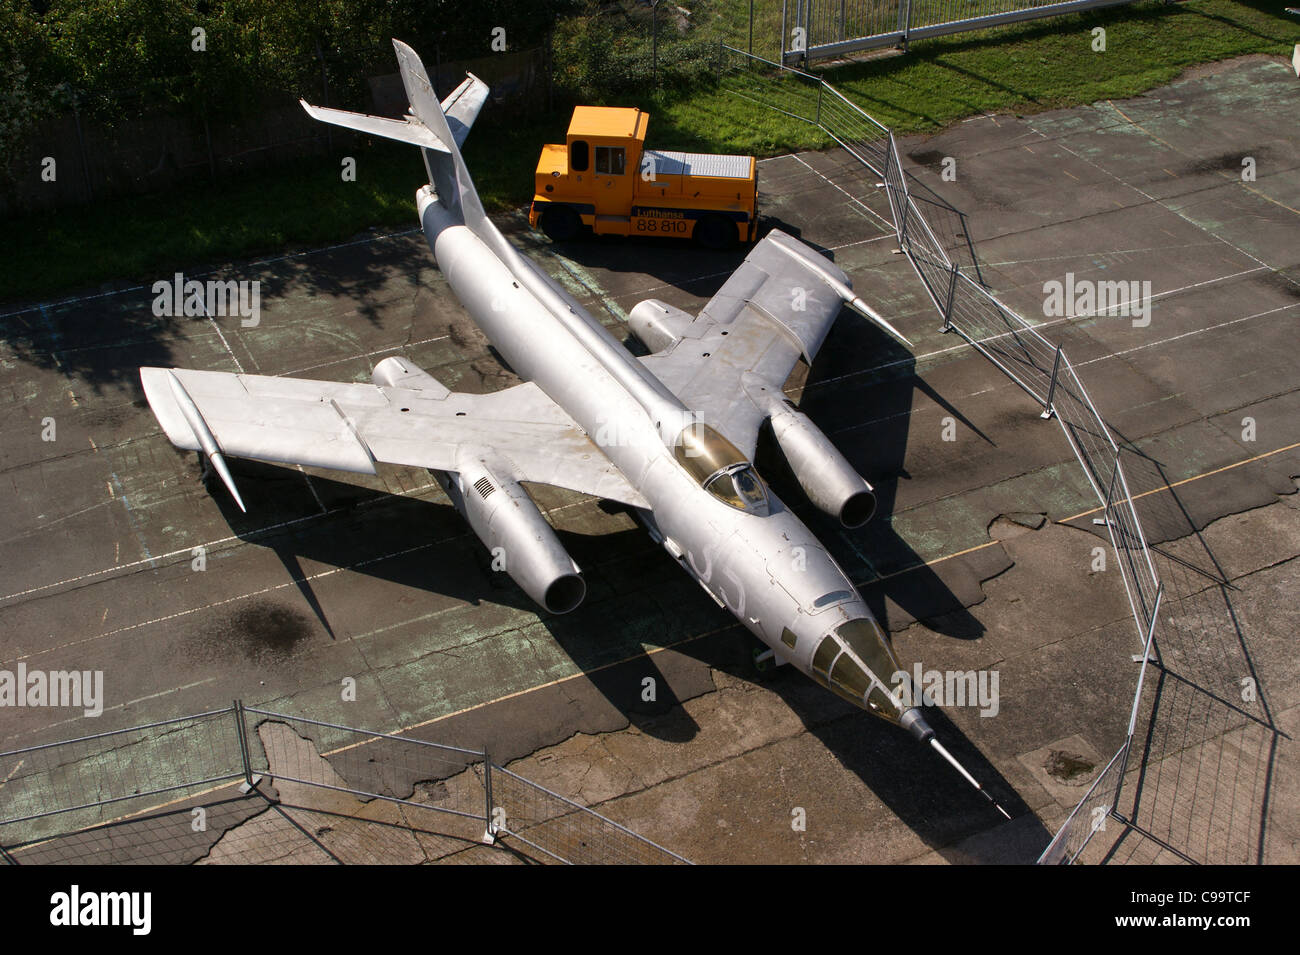 Aluminium Plane High Resolution Stock Photography and Images - Alamy